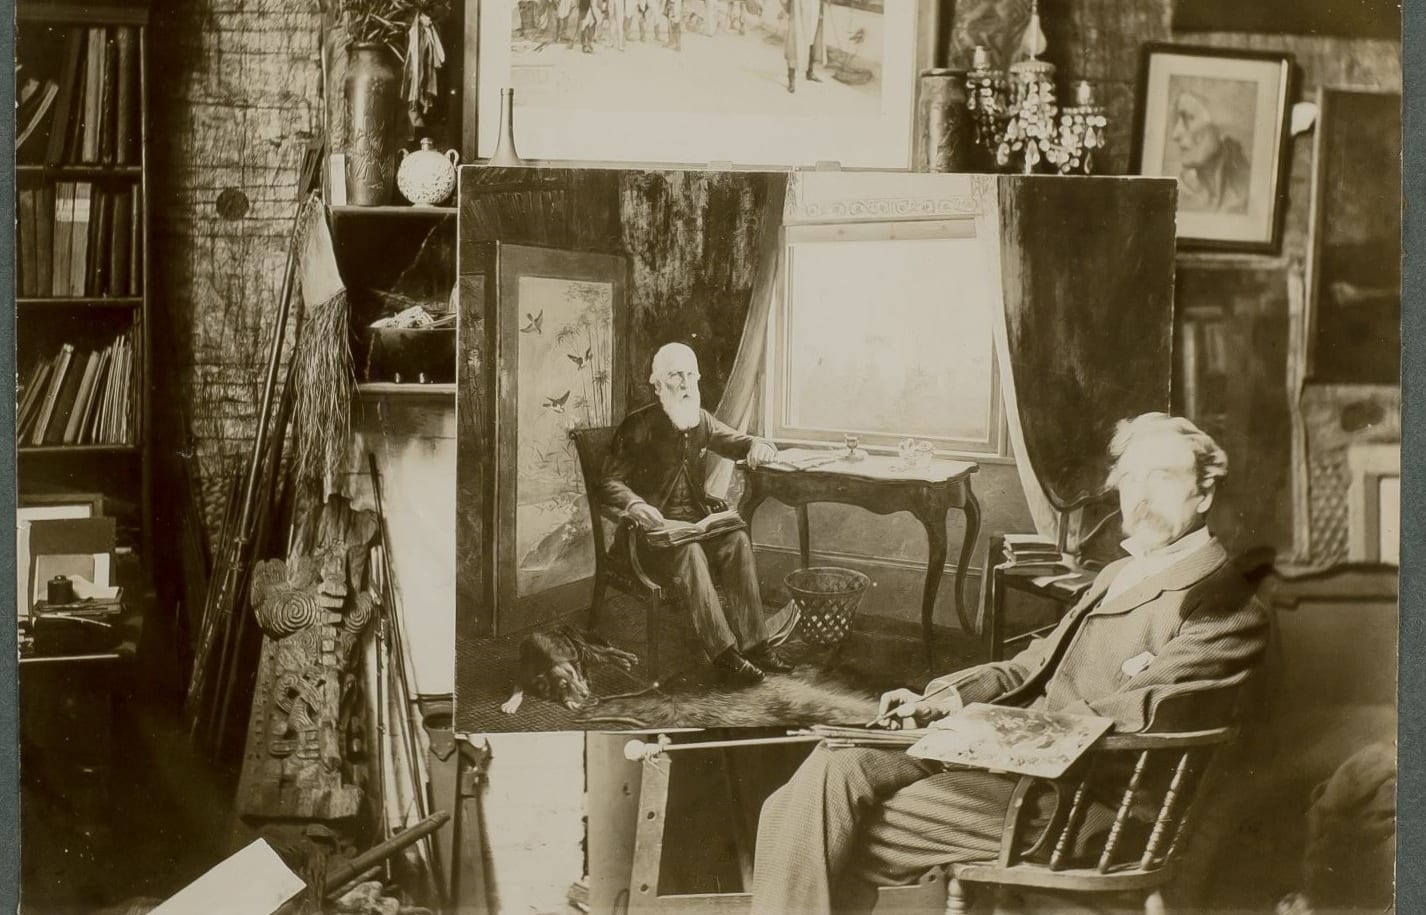 Louis John Steele in his studio with his portrait of Sir John Logan Campbell at Kilbryde, black and white photograph from Campbell’s unpublished “My autobiography”, 1904-7, Campbell papers, Cornwall Park Trust on deposit Auckland War Memorial Museum.